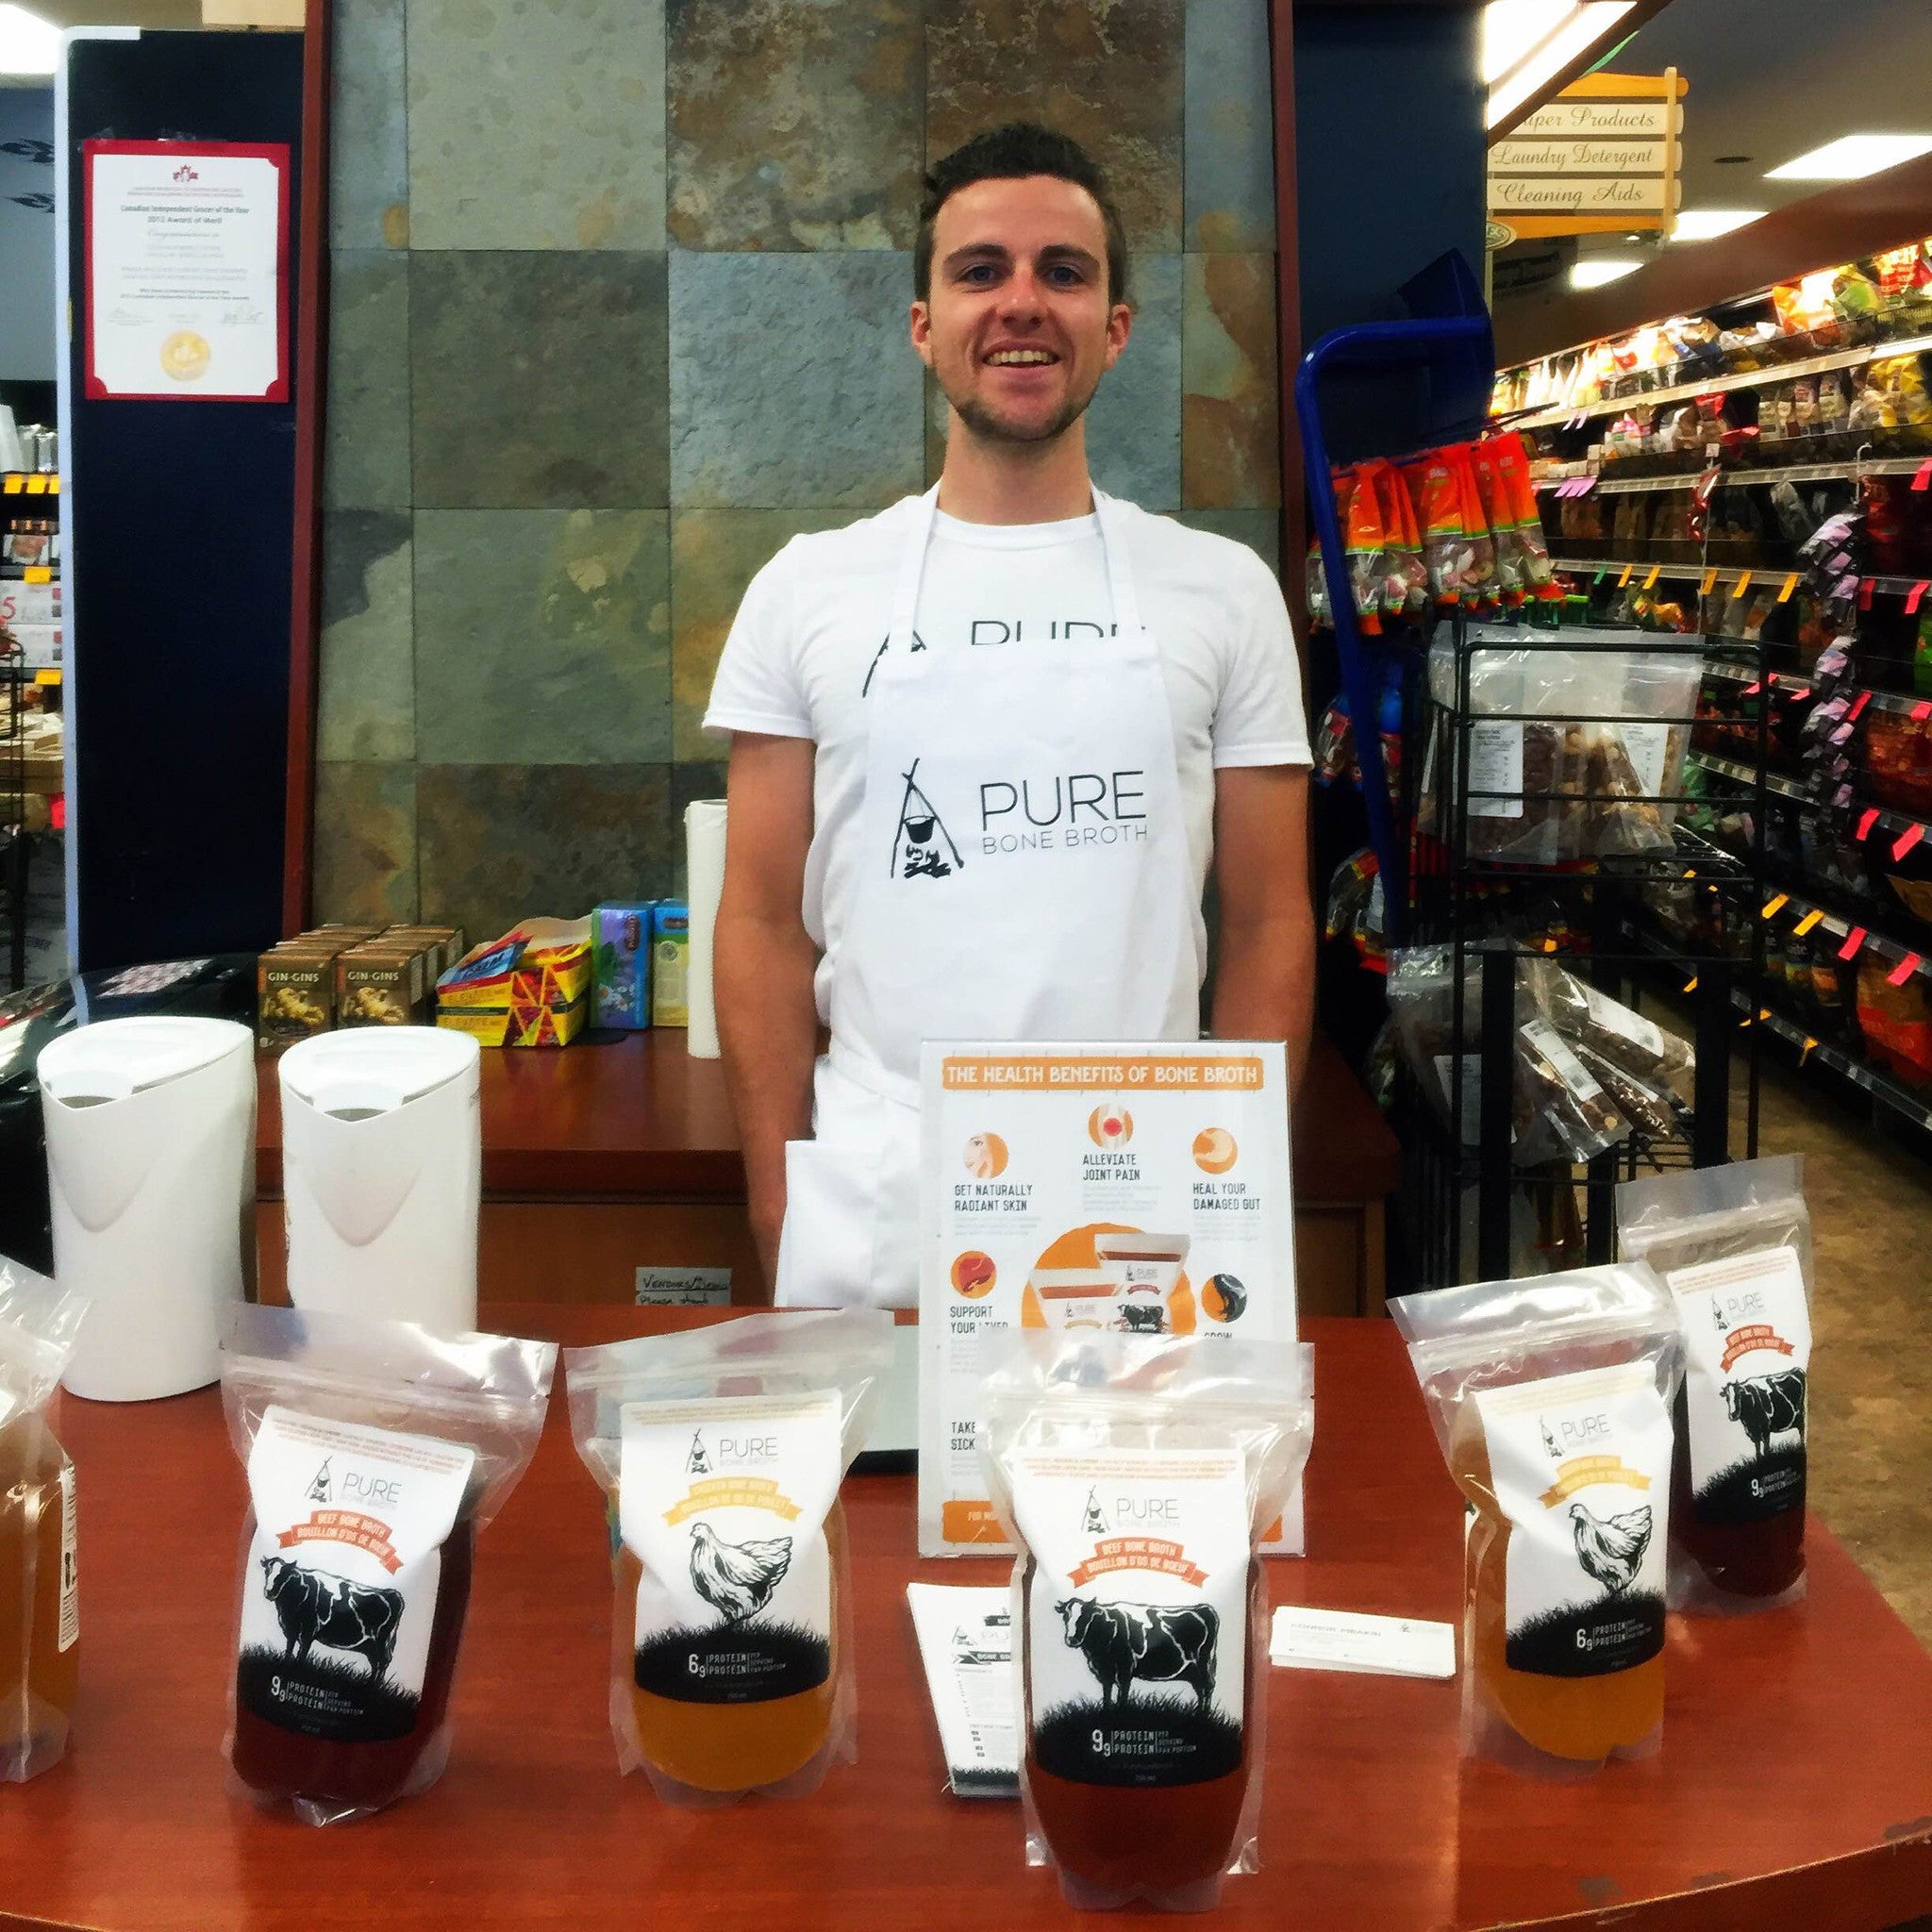 Pure Bone Broth on Sale at Choices (and tastings)!